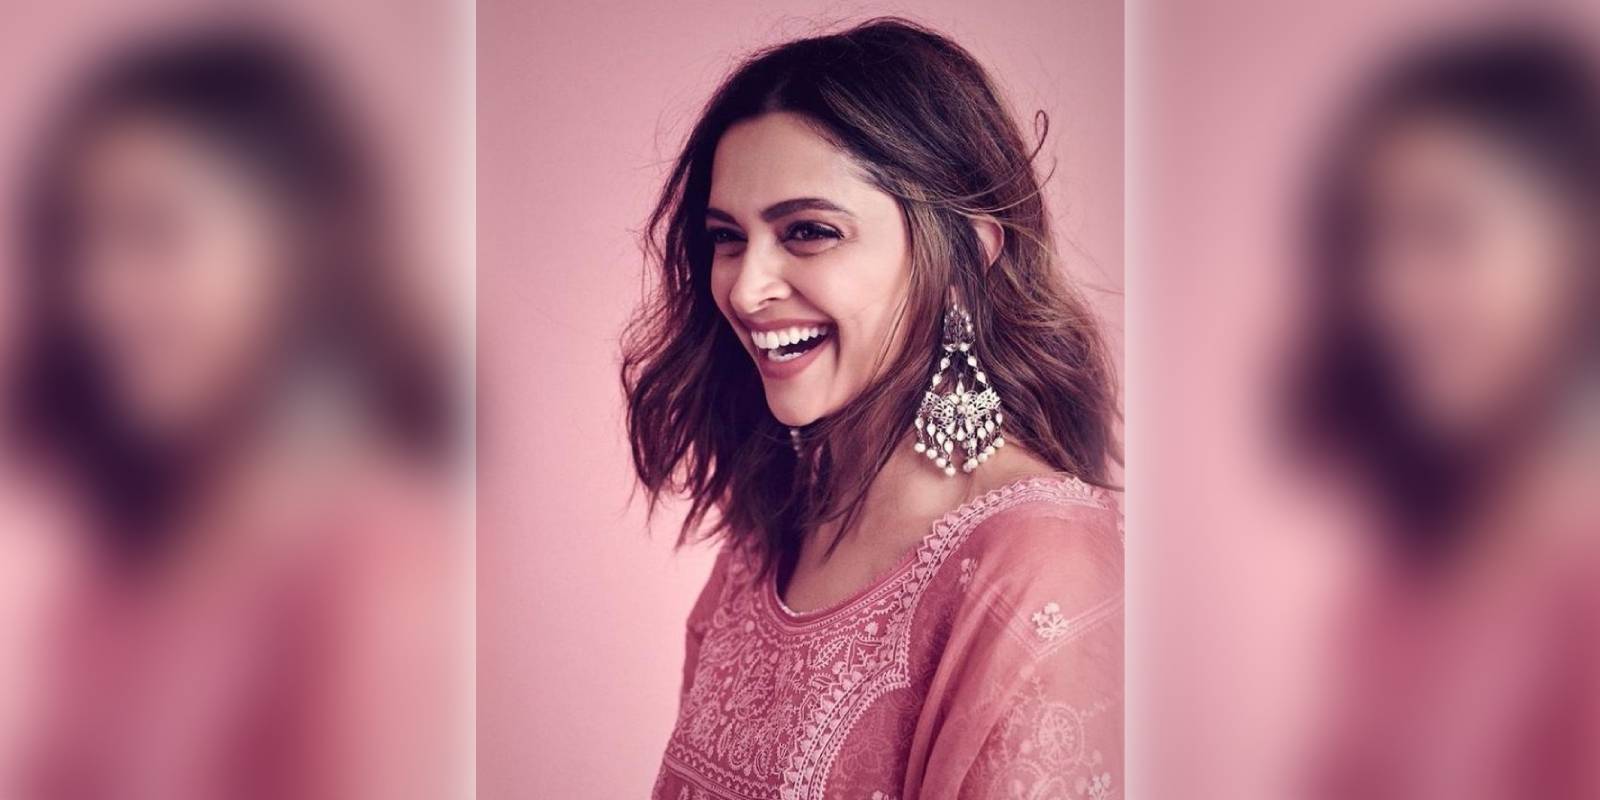 More glamour than acting: A critique of Deepika Padukone’s recent choices